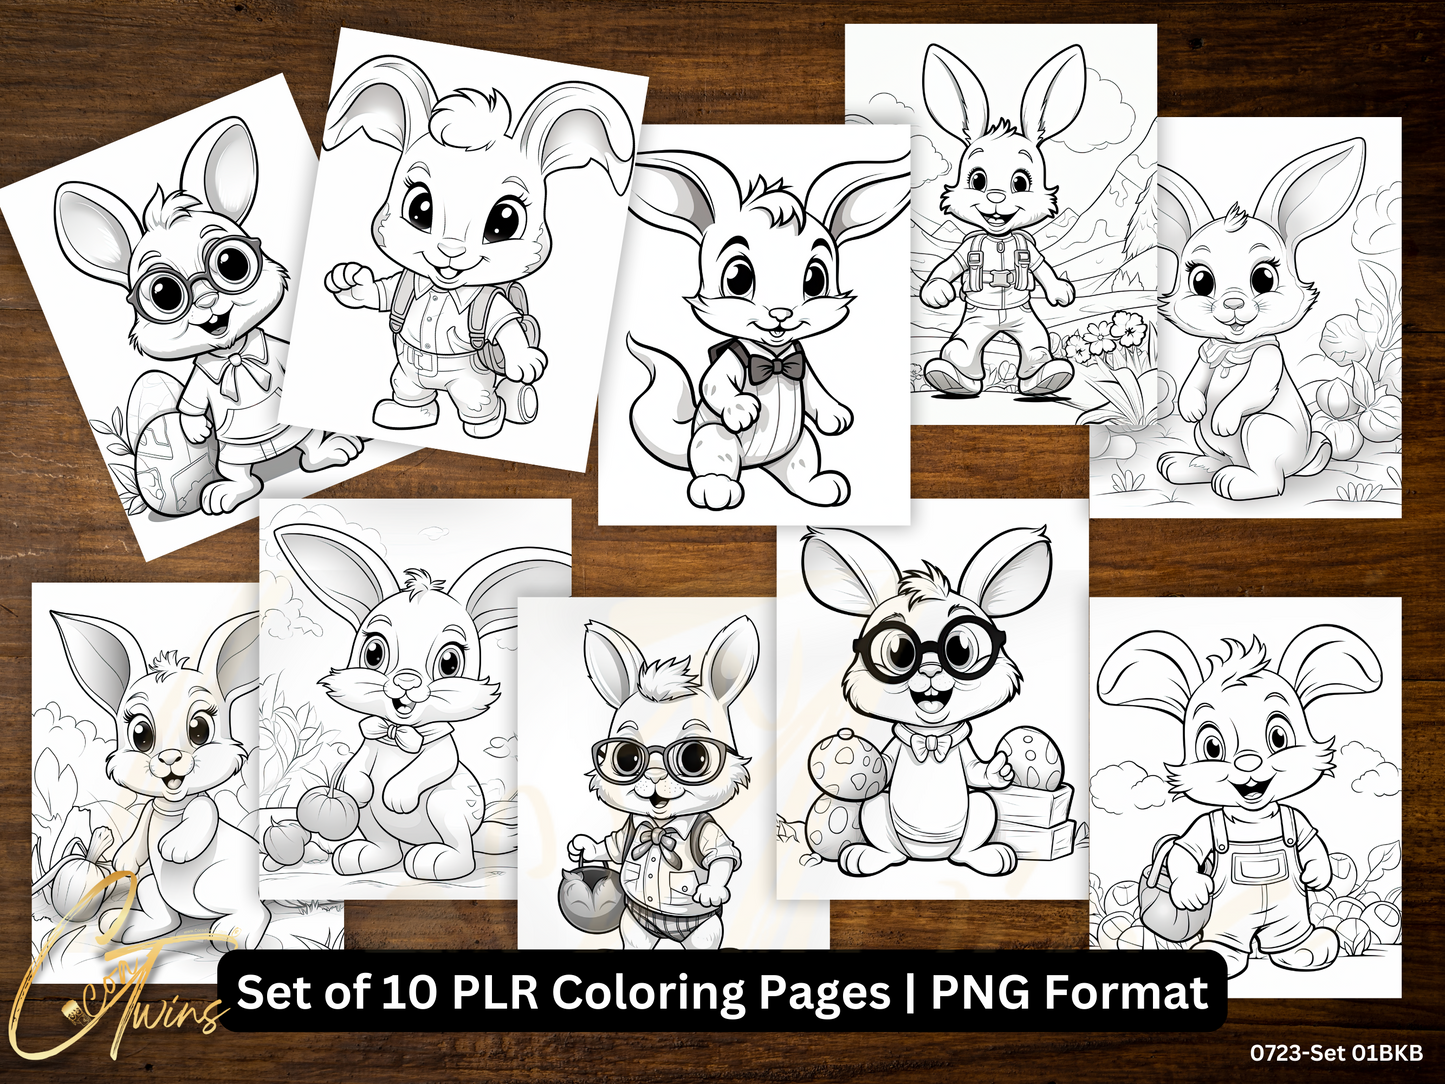 Limited Edition | PLR Coloring Pages | Set 02-BKB (0723)